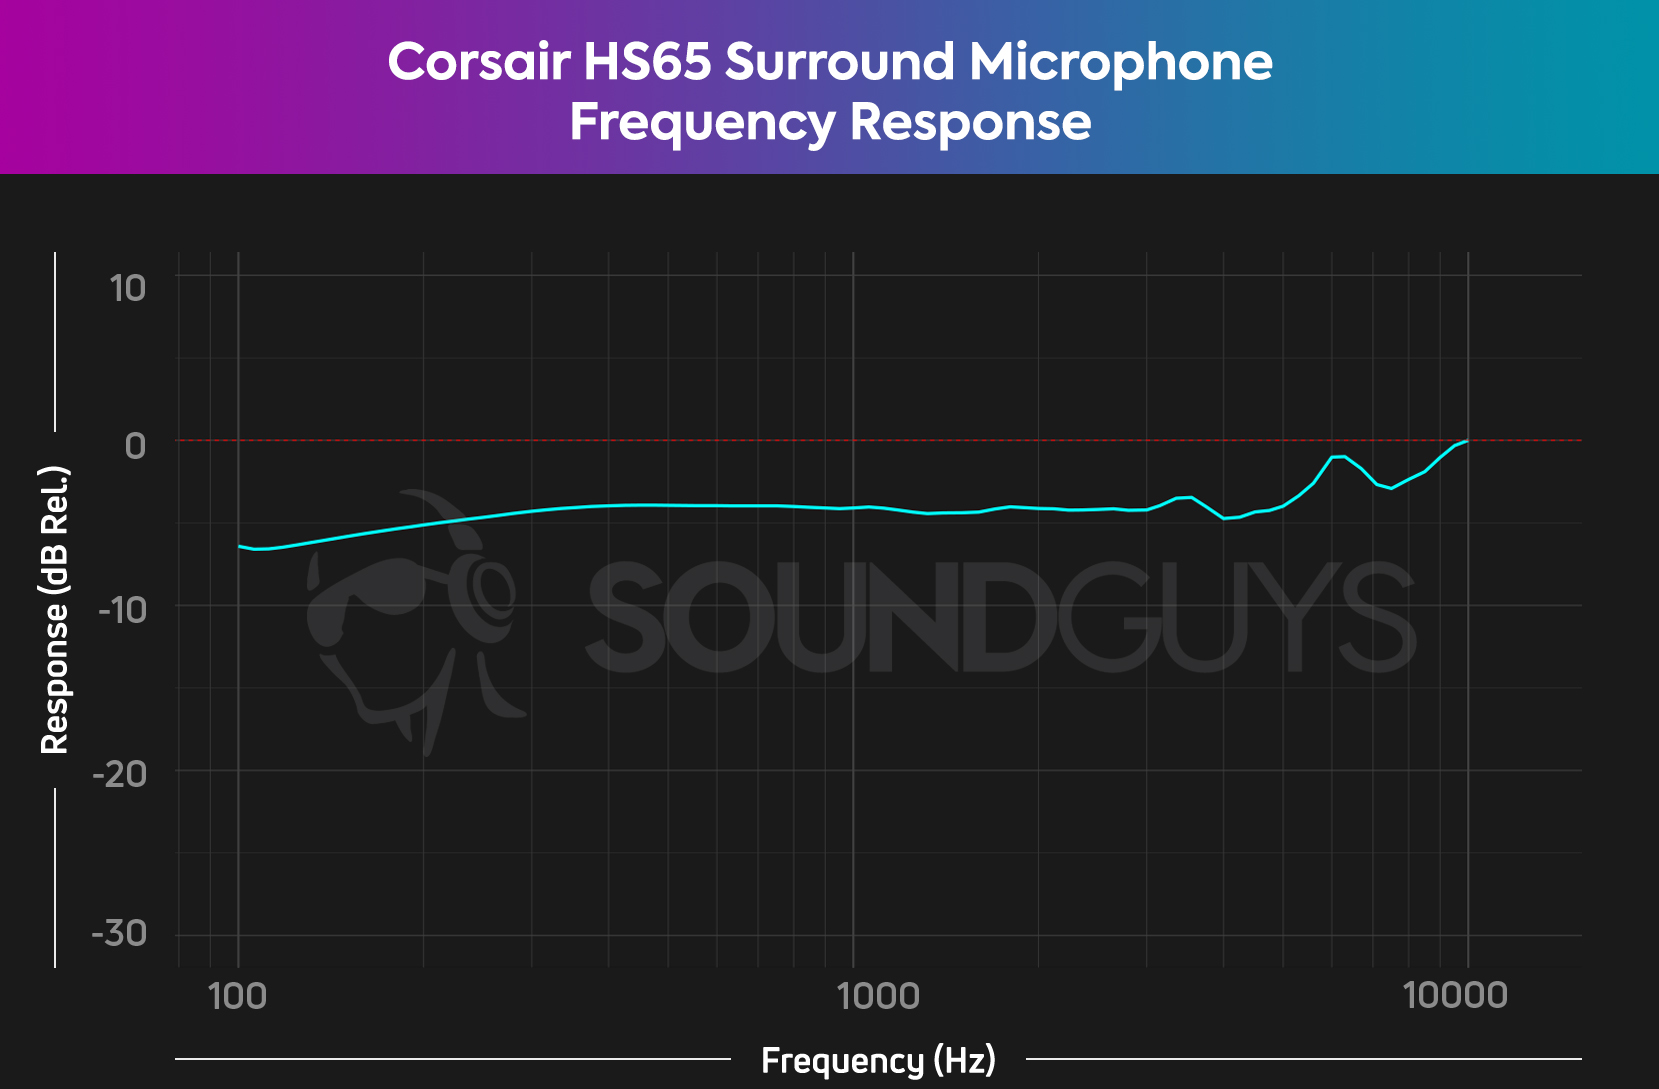 The microphone frequency response chart for the Corsair HS65 Surround.